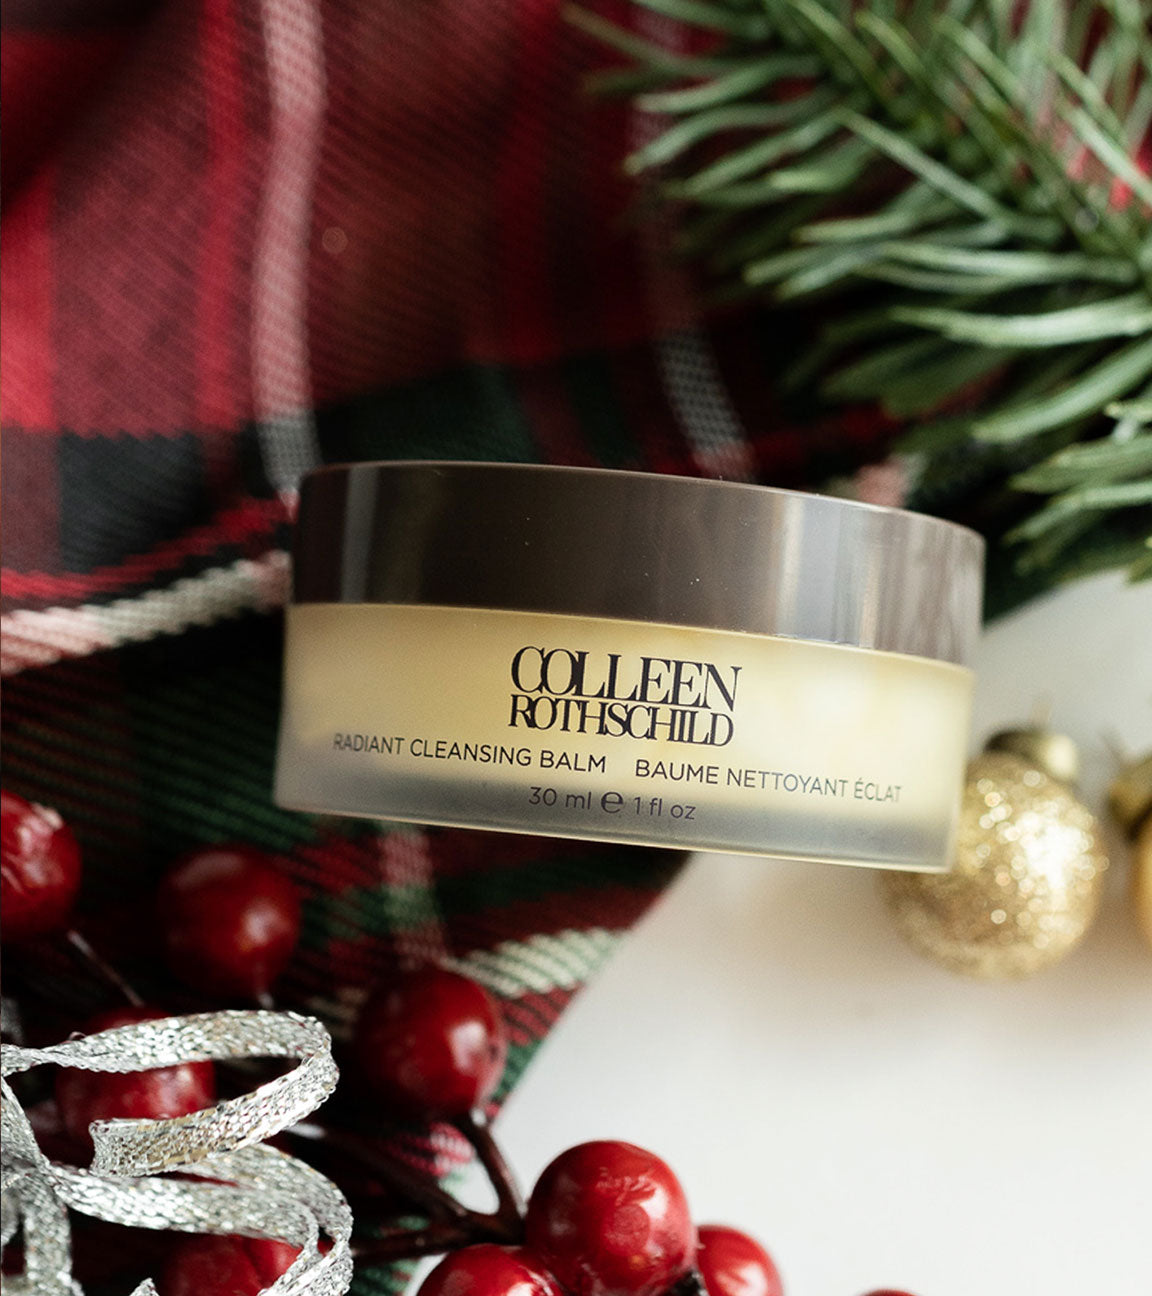 Colleen Rothschild Beauty radiant cleansing balm on holiday background.